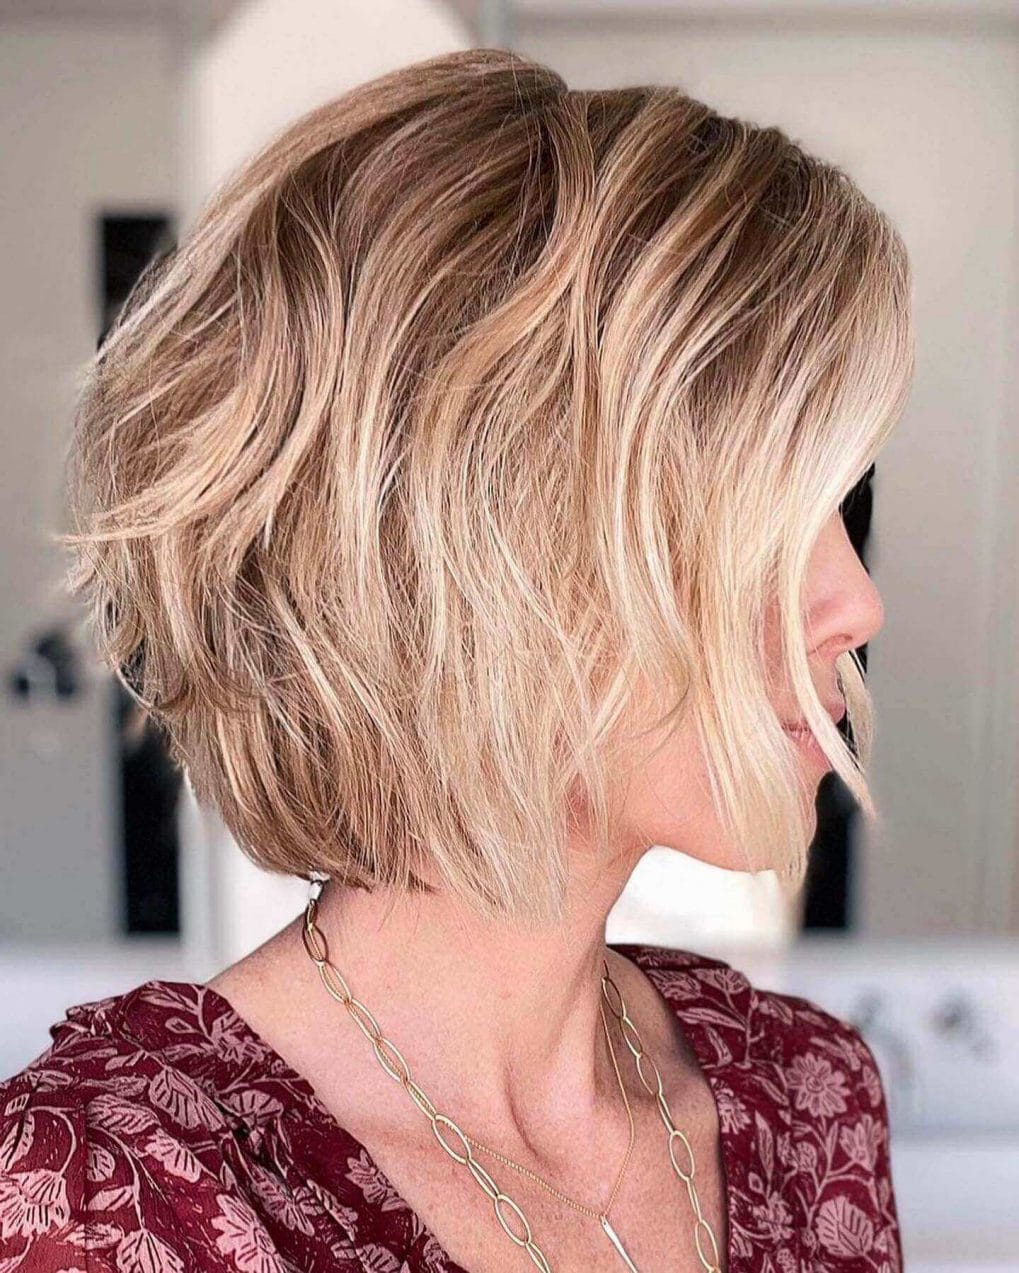 Modern blonde highlighted textured bob with a tousled, edgy look.